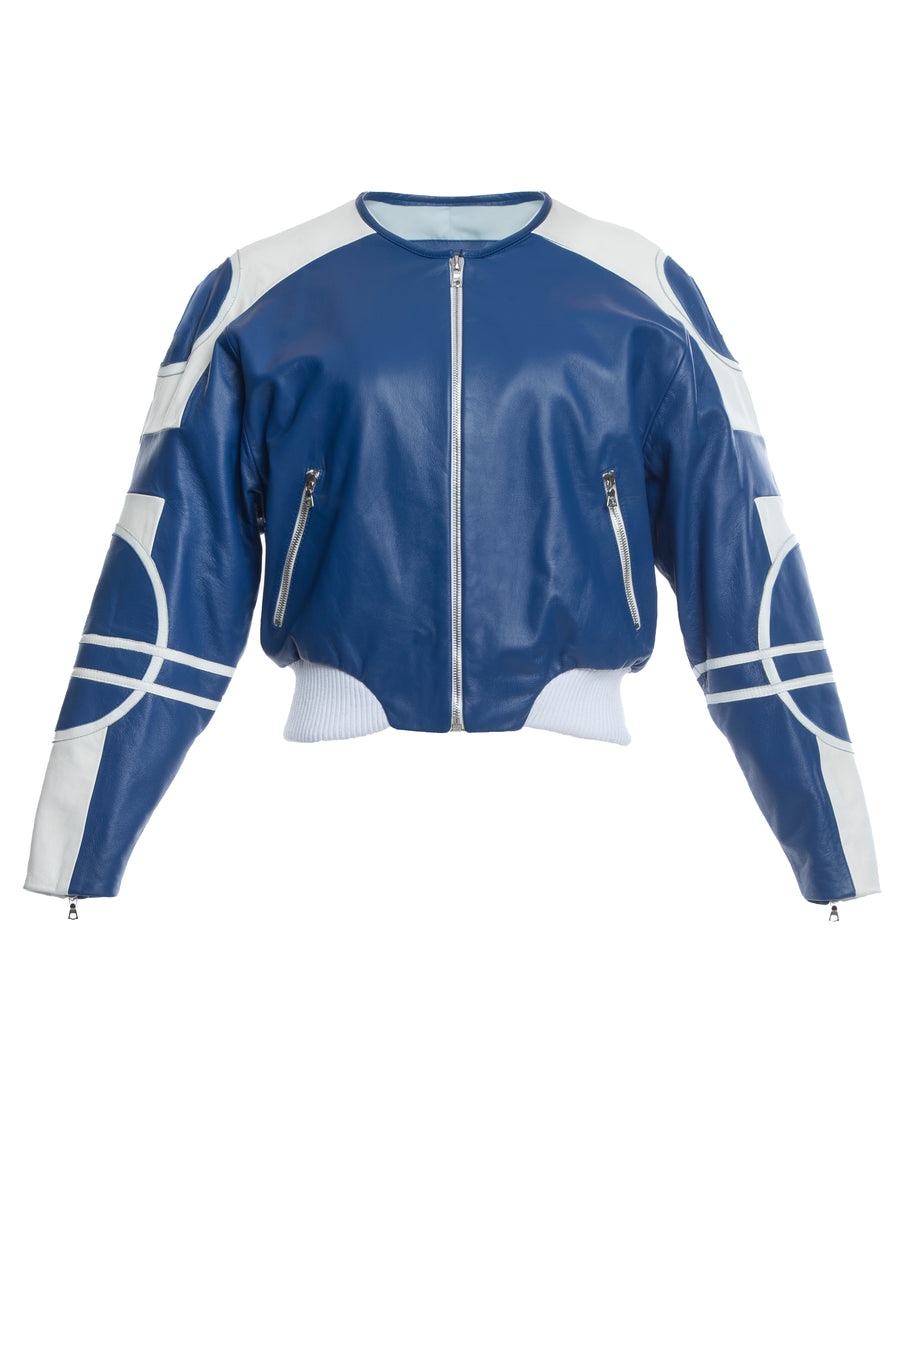 HARDWARE LDN LIMITED EDITION WHITE AND ROYAL BLUE BIKER JACKET